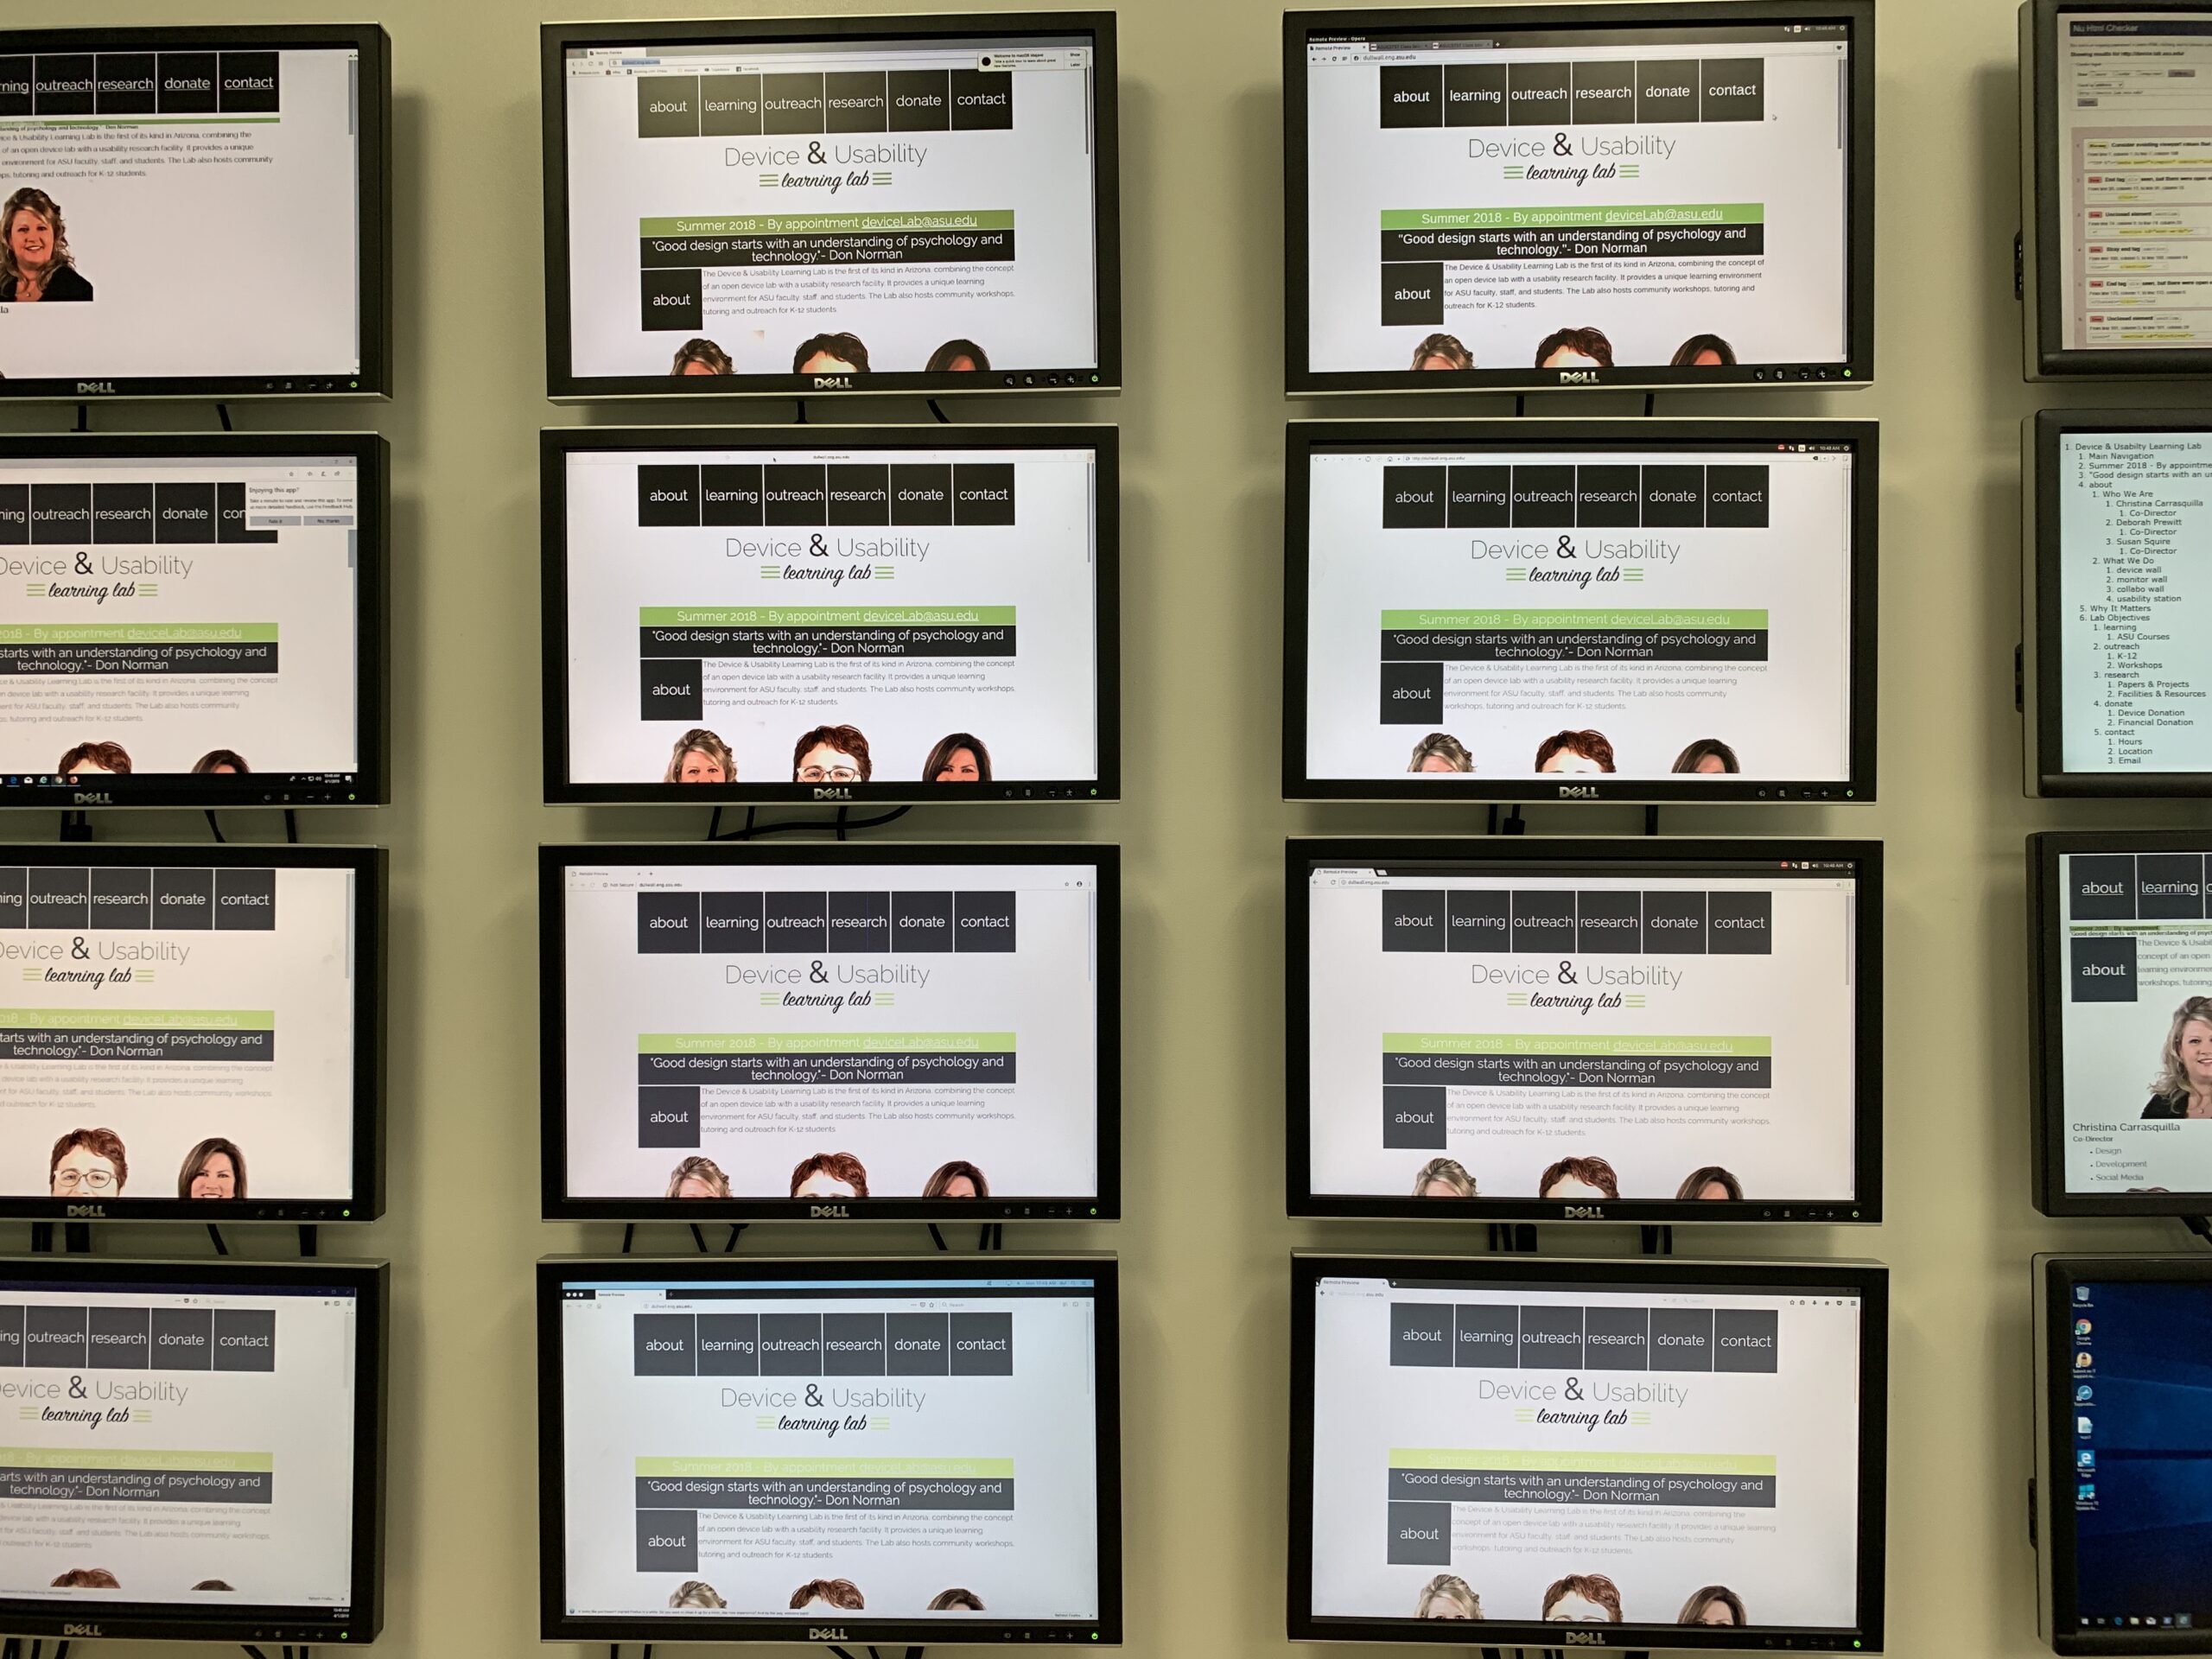 the monitor wall in the lab includes 16 monitors with mac, windows, and linux operating systems running multiple browsers each for testing